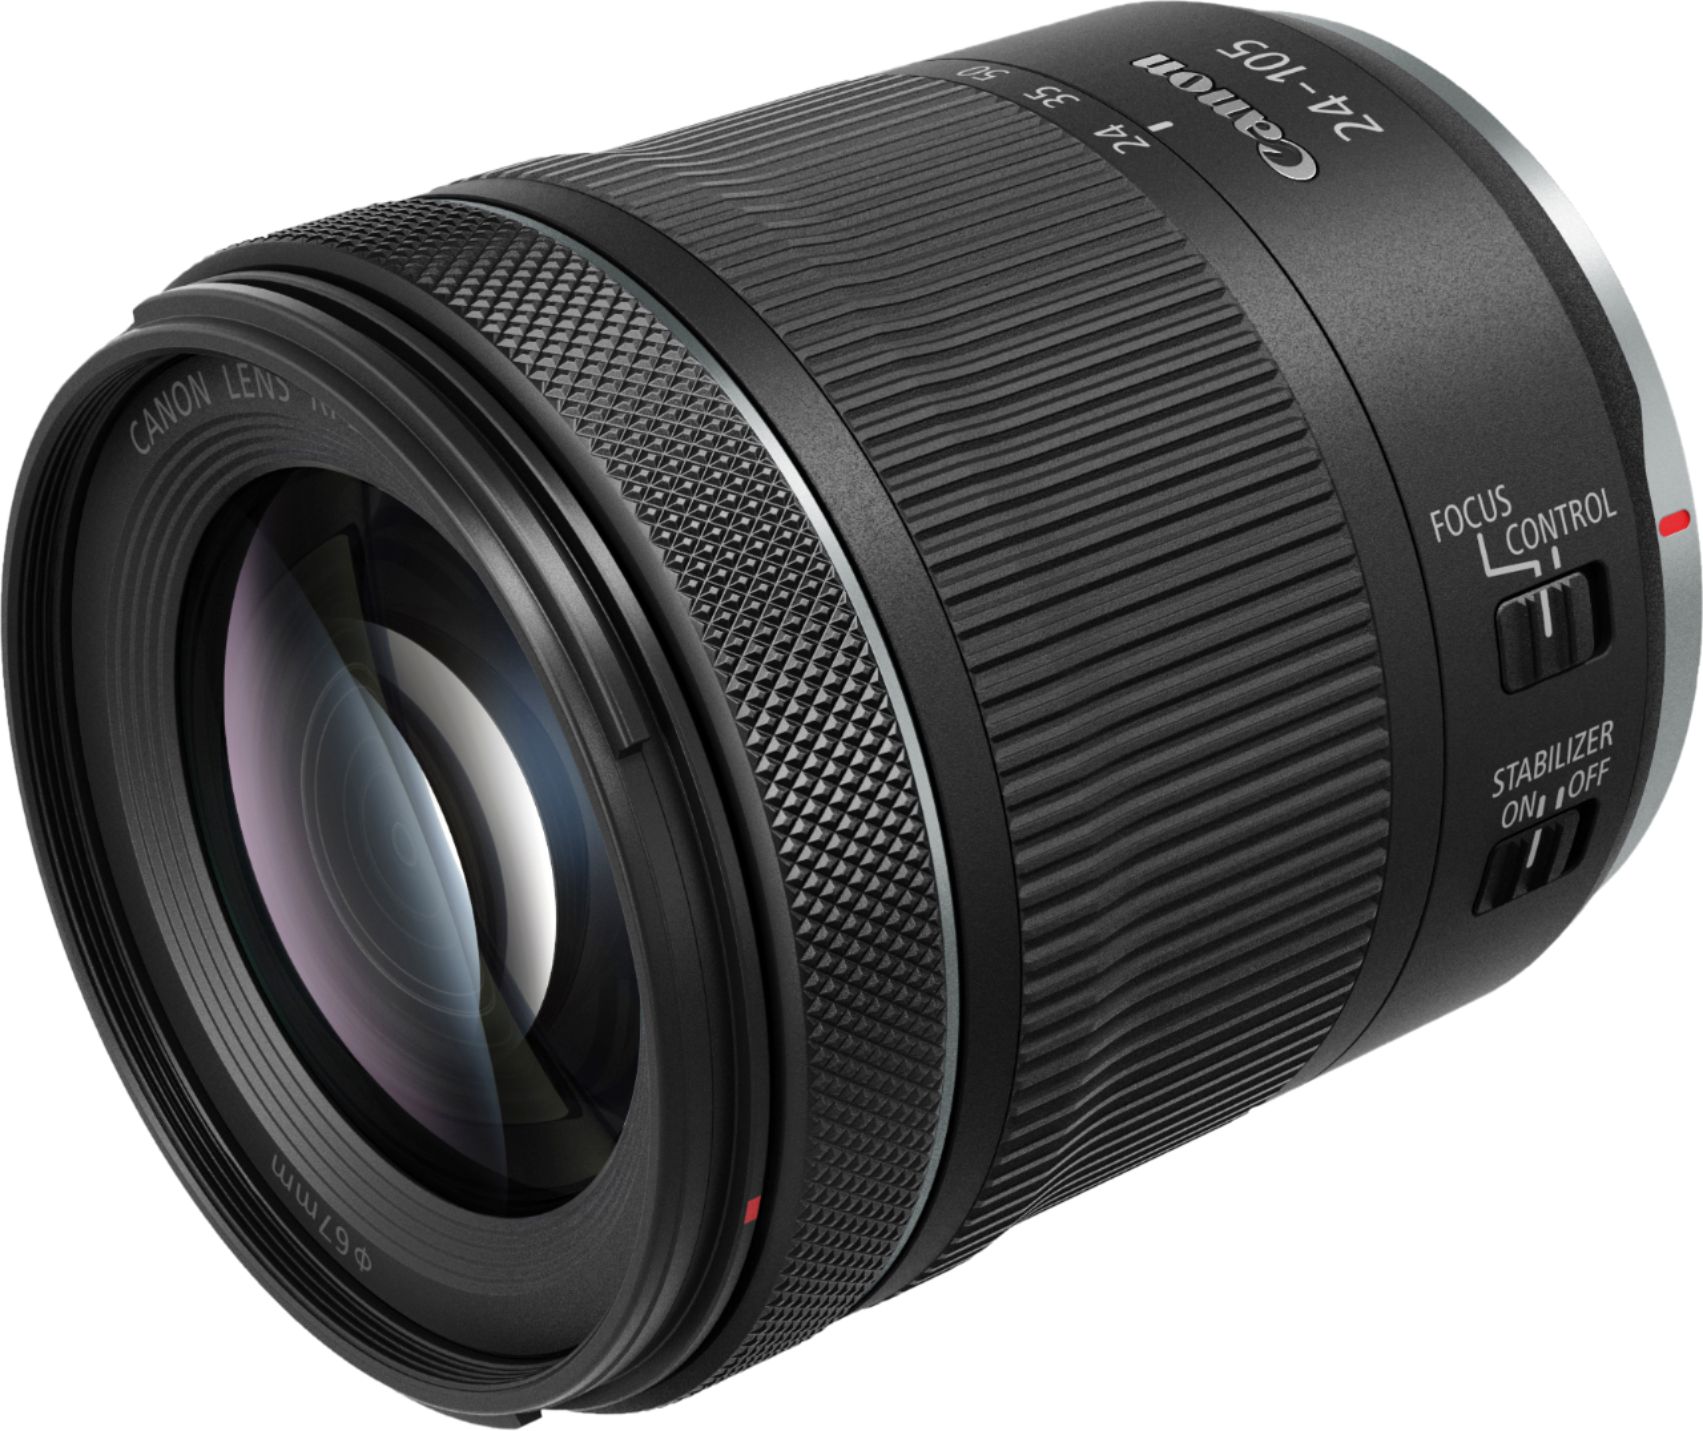 Canon EOS RP con 24-105mm f/4-7.1 IS STM Mirrorless